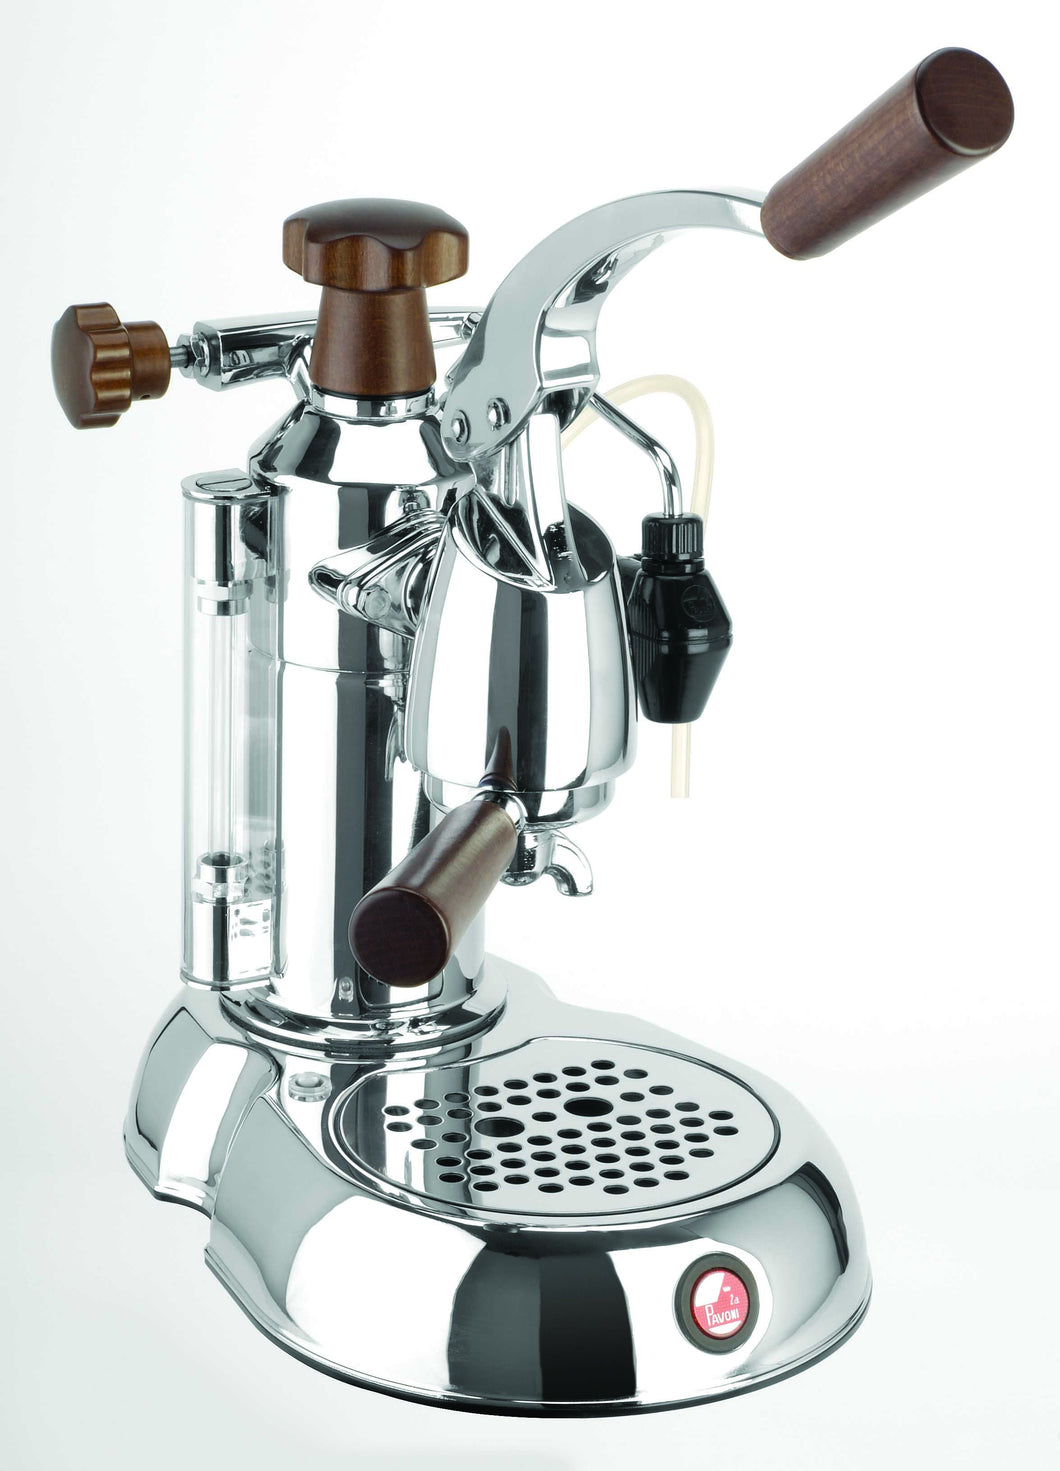 La Pavoni Stradivari - Singapore Cowpresso Coffee Roasters | Specialty Coffee Beans | Online Subscription | Freshly Delivered |